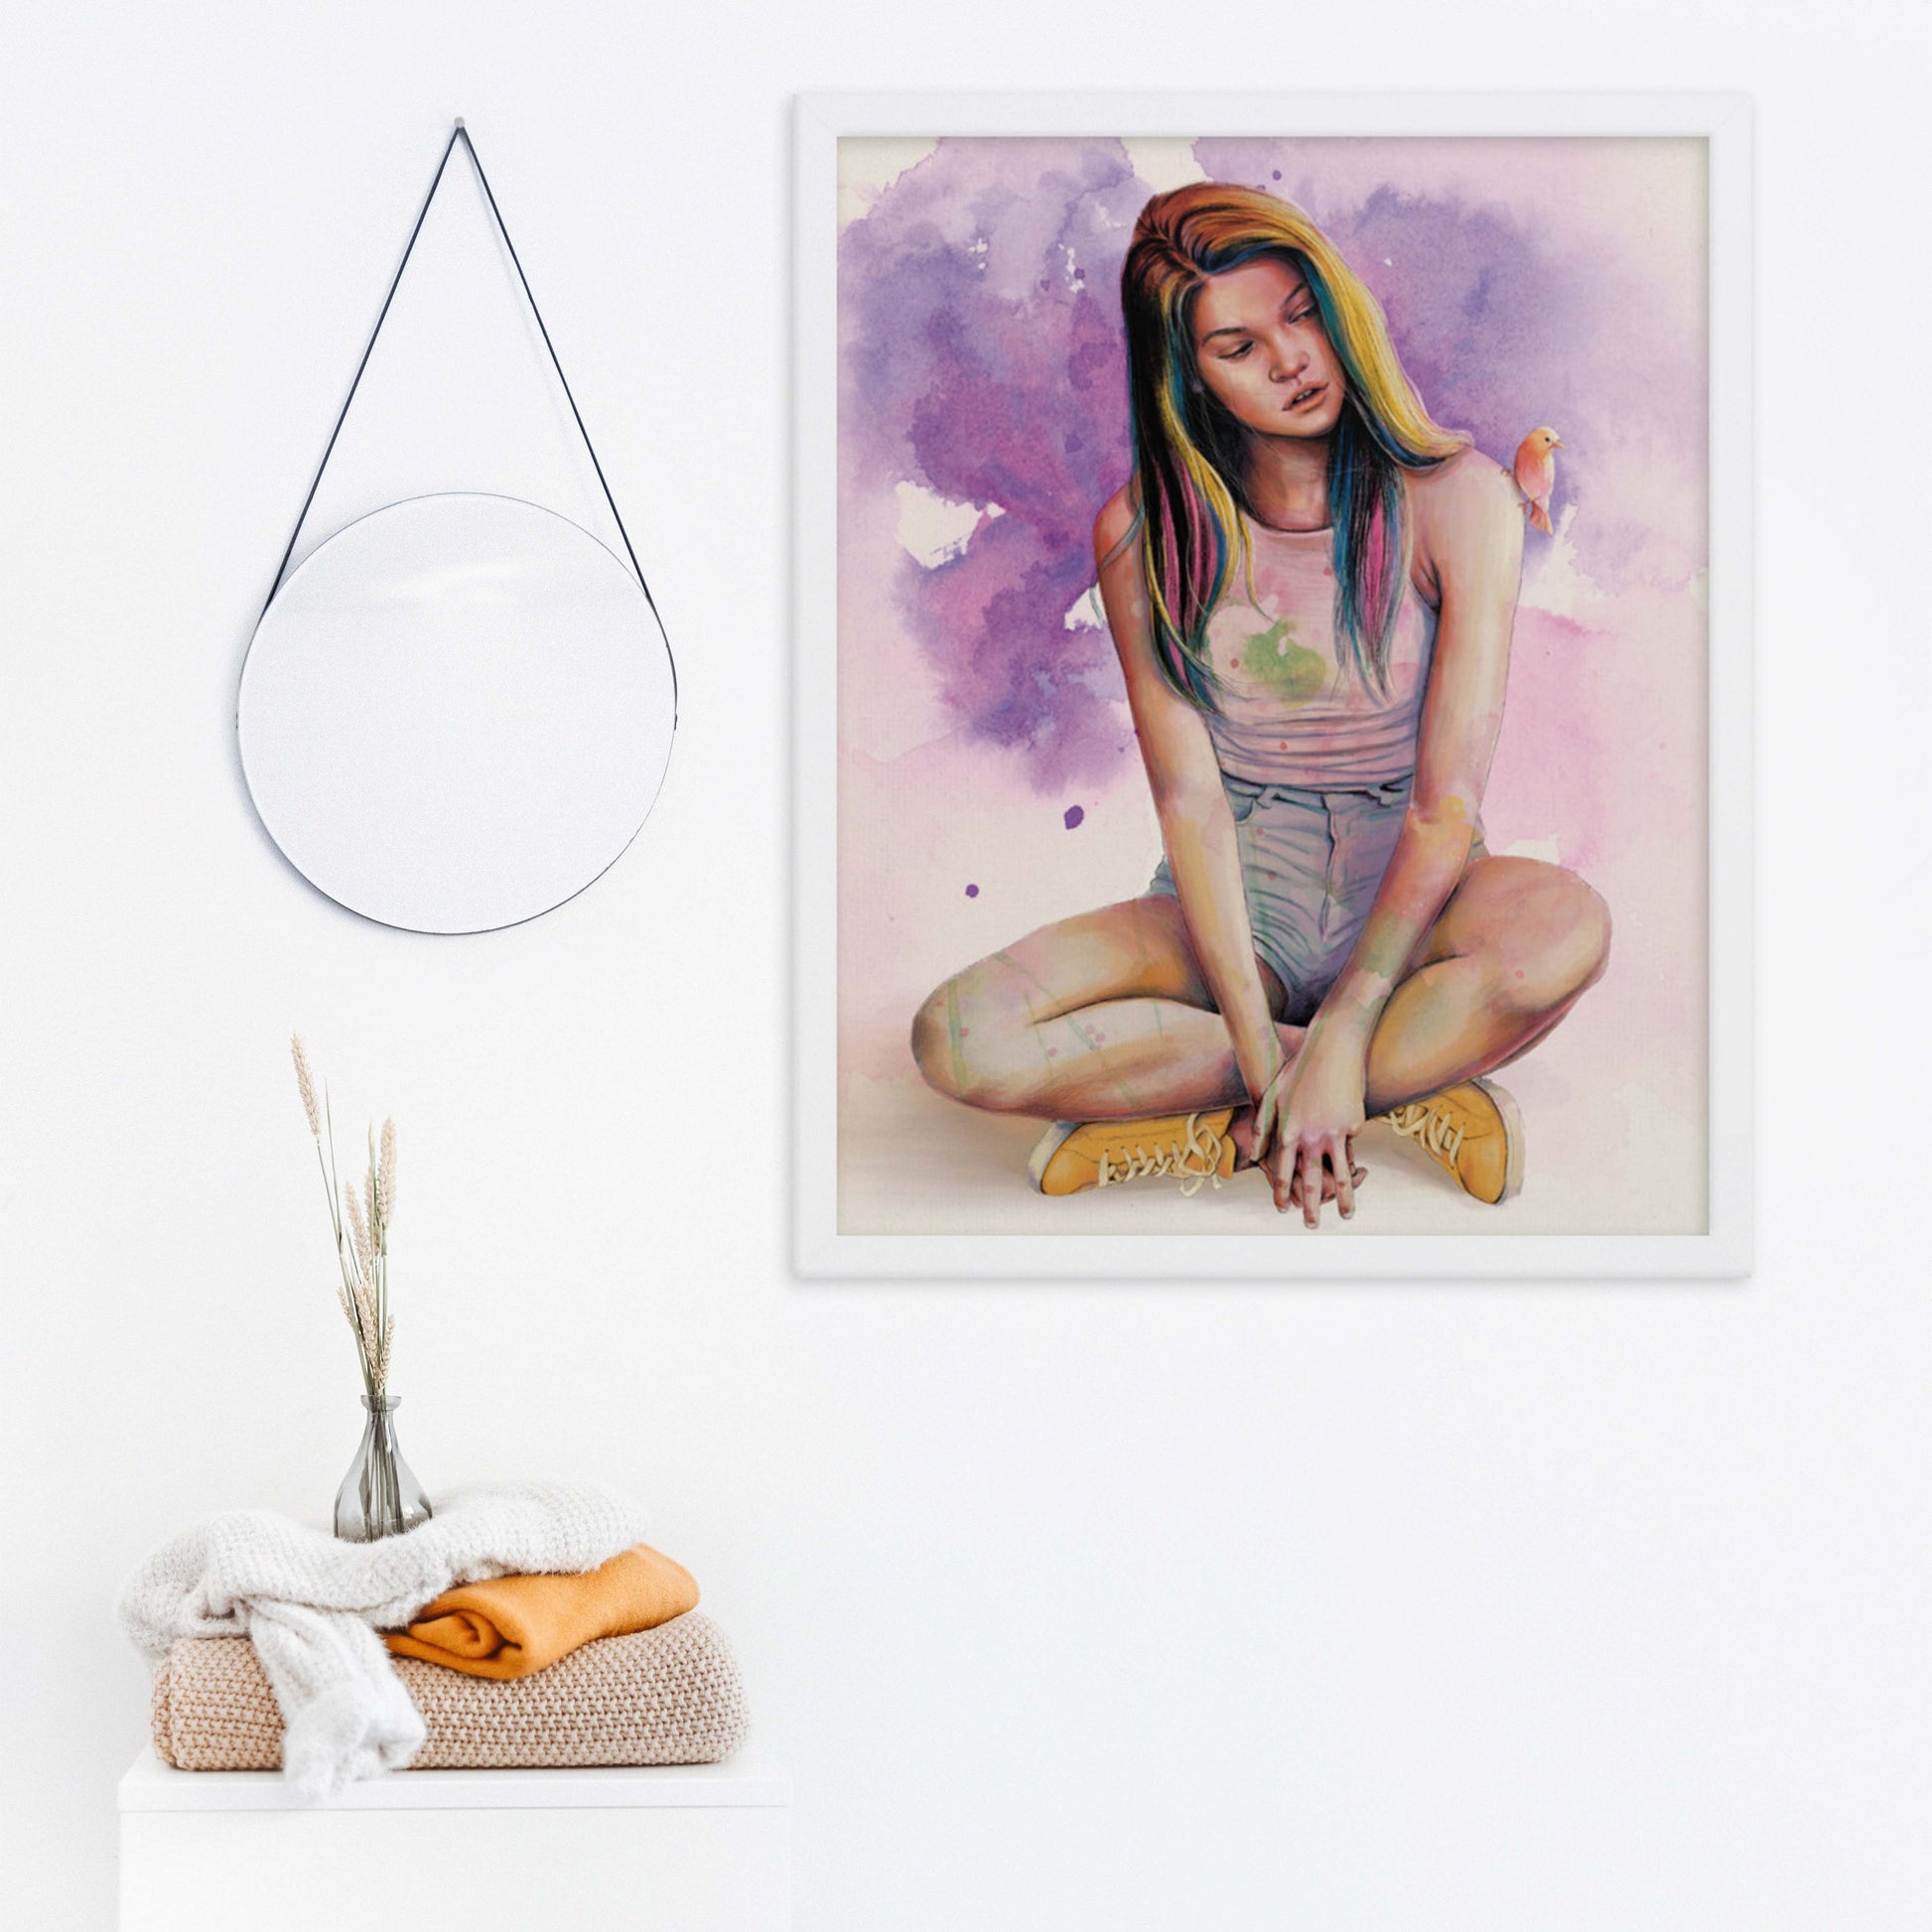 A girl in yellow shoes sitting idly with a bird sitting on her shoulder art poster in purple, pink & yellow hues white framed poster